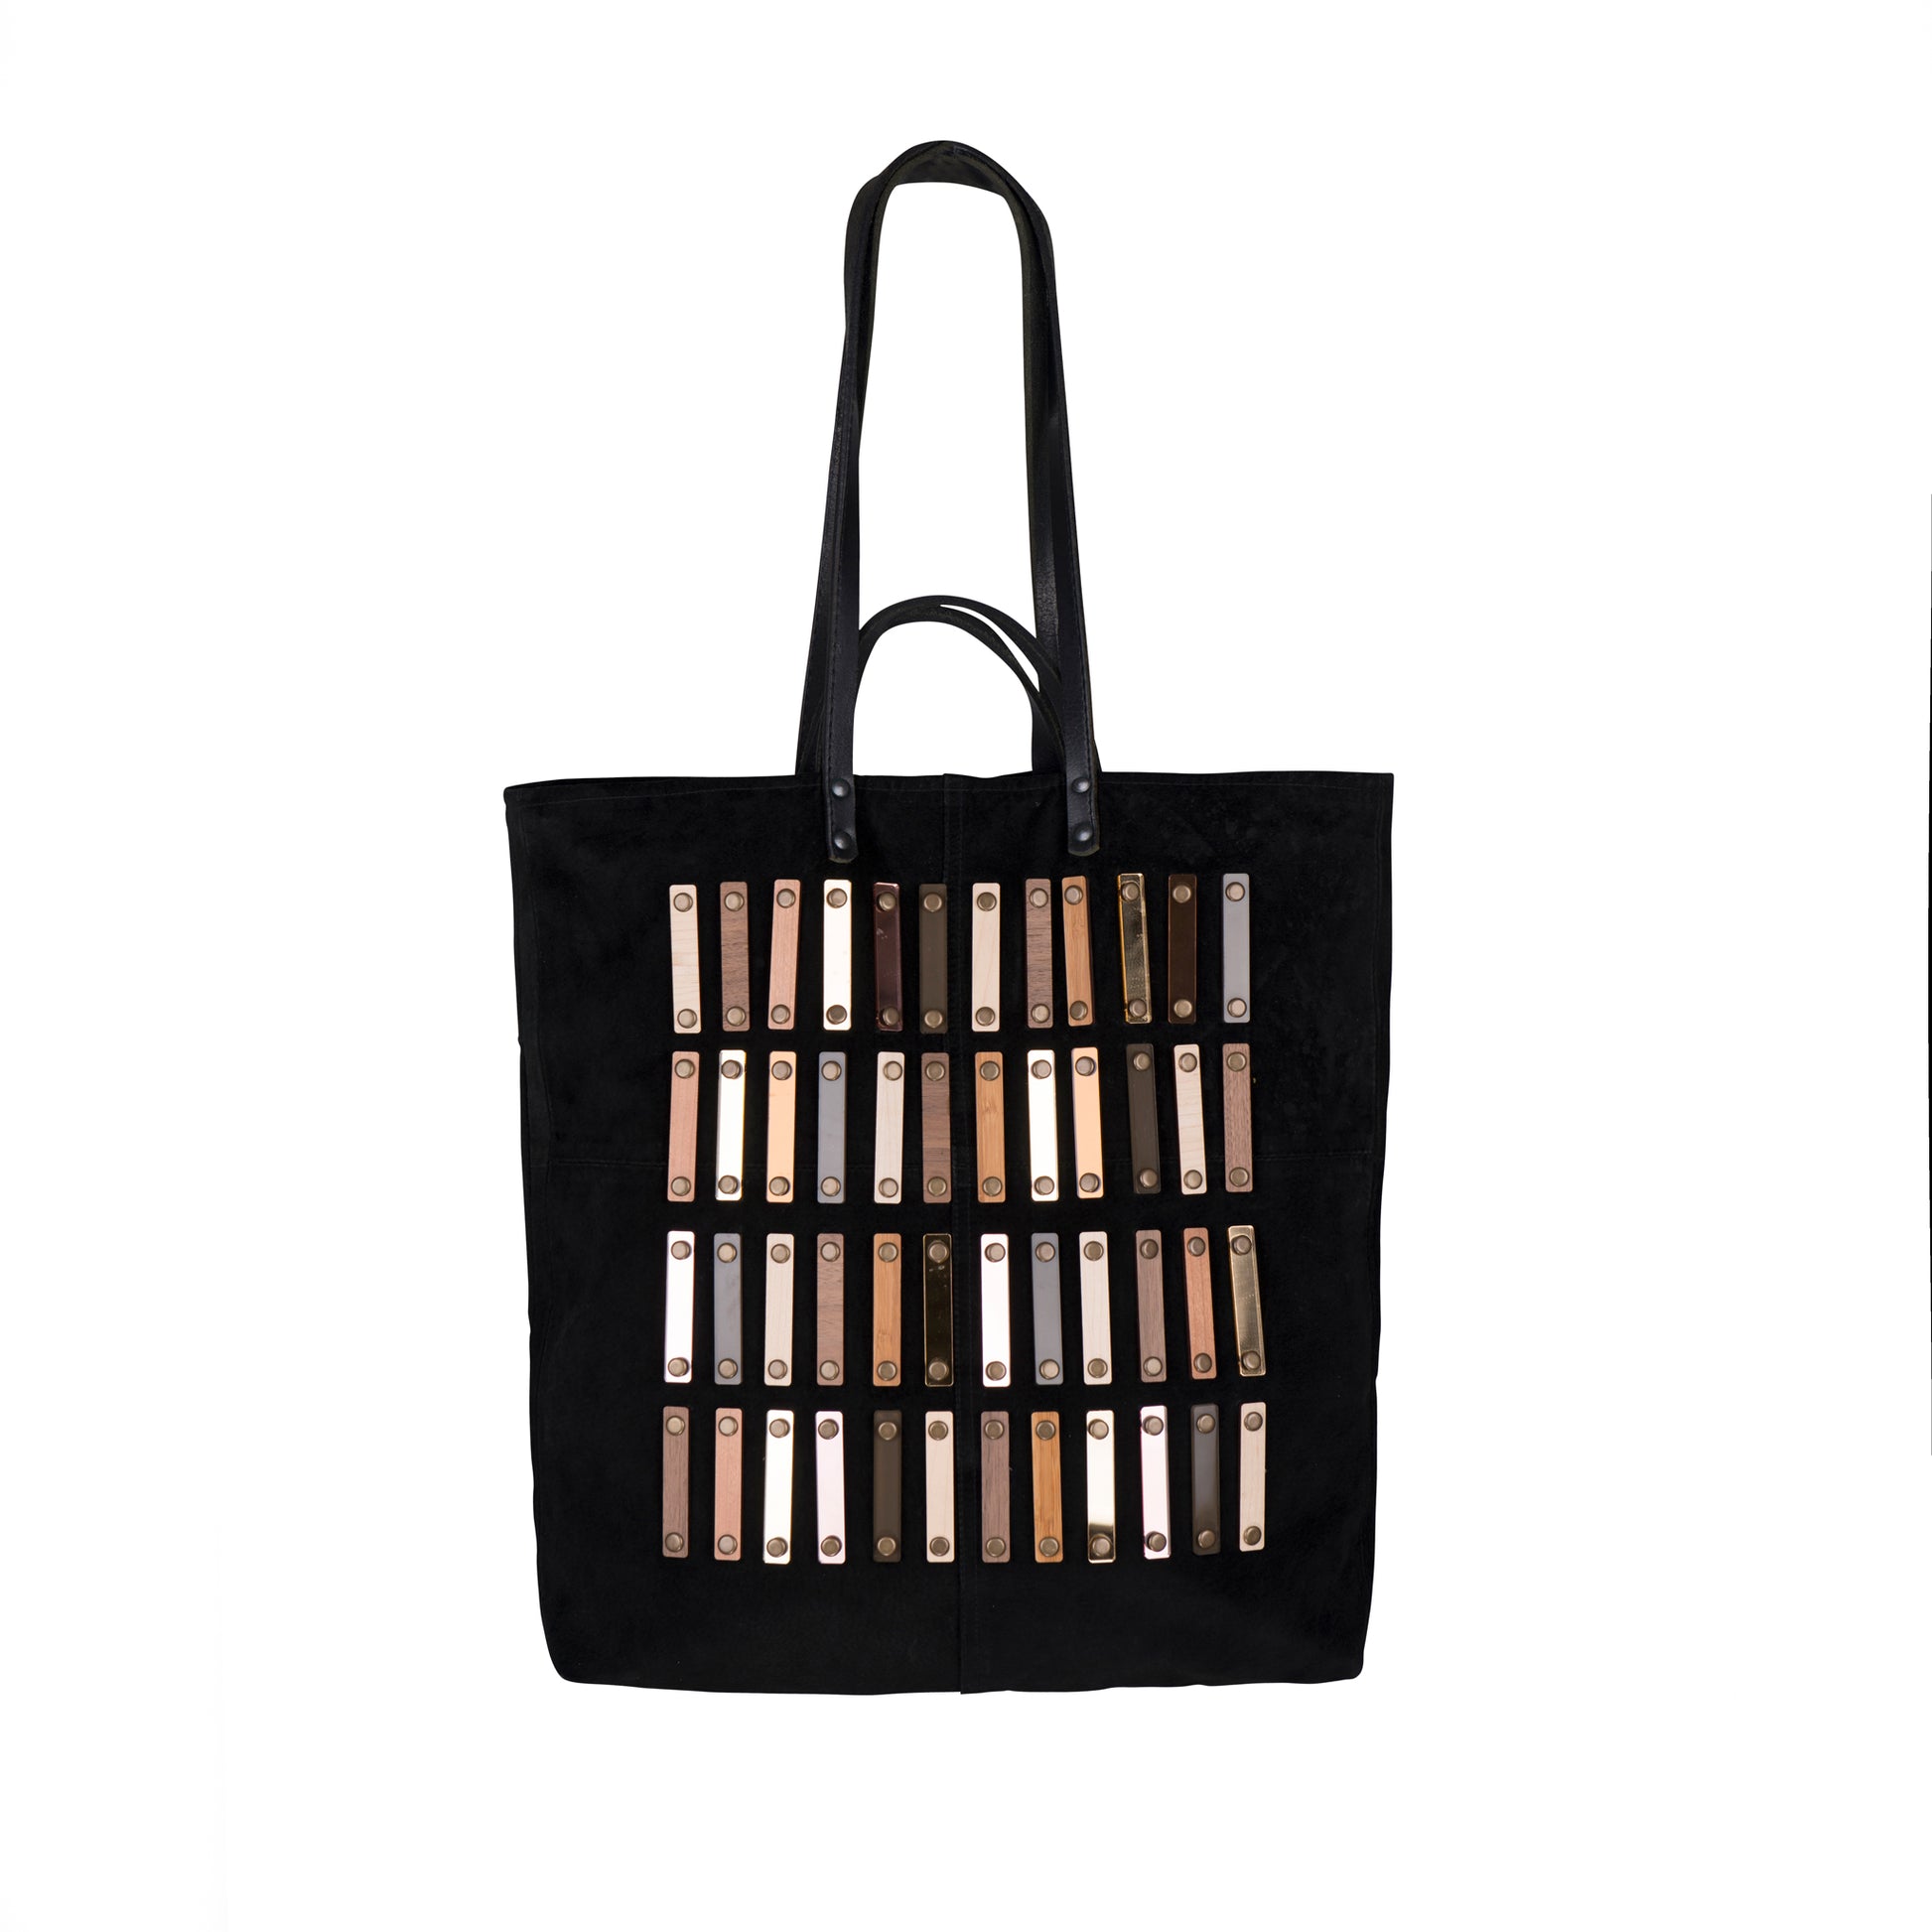 METANoIA black recycled leather tote handbag with acrylic and wooden vertical accents studded in a repeatitive fashion in an array of natural wooden browns, coppers and white. 